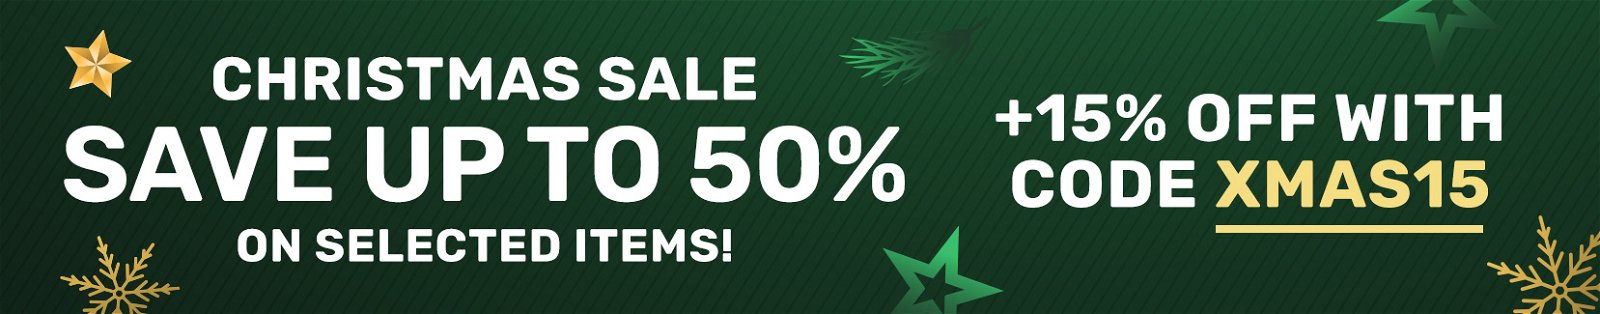 christmas sale save up to 50% on selected items +15% off with code xmas15